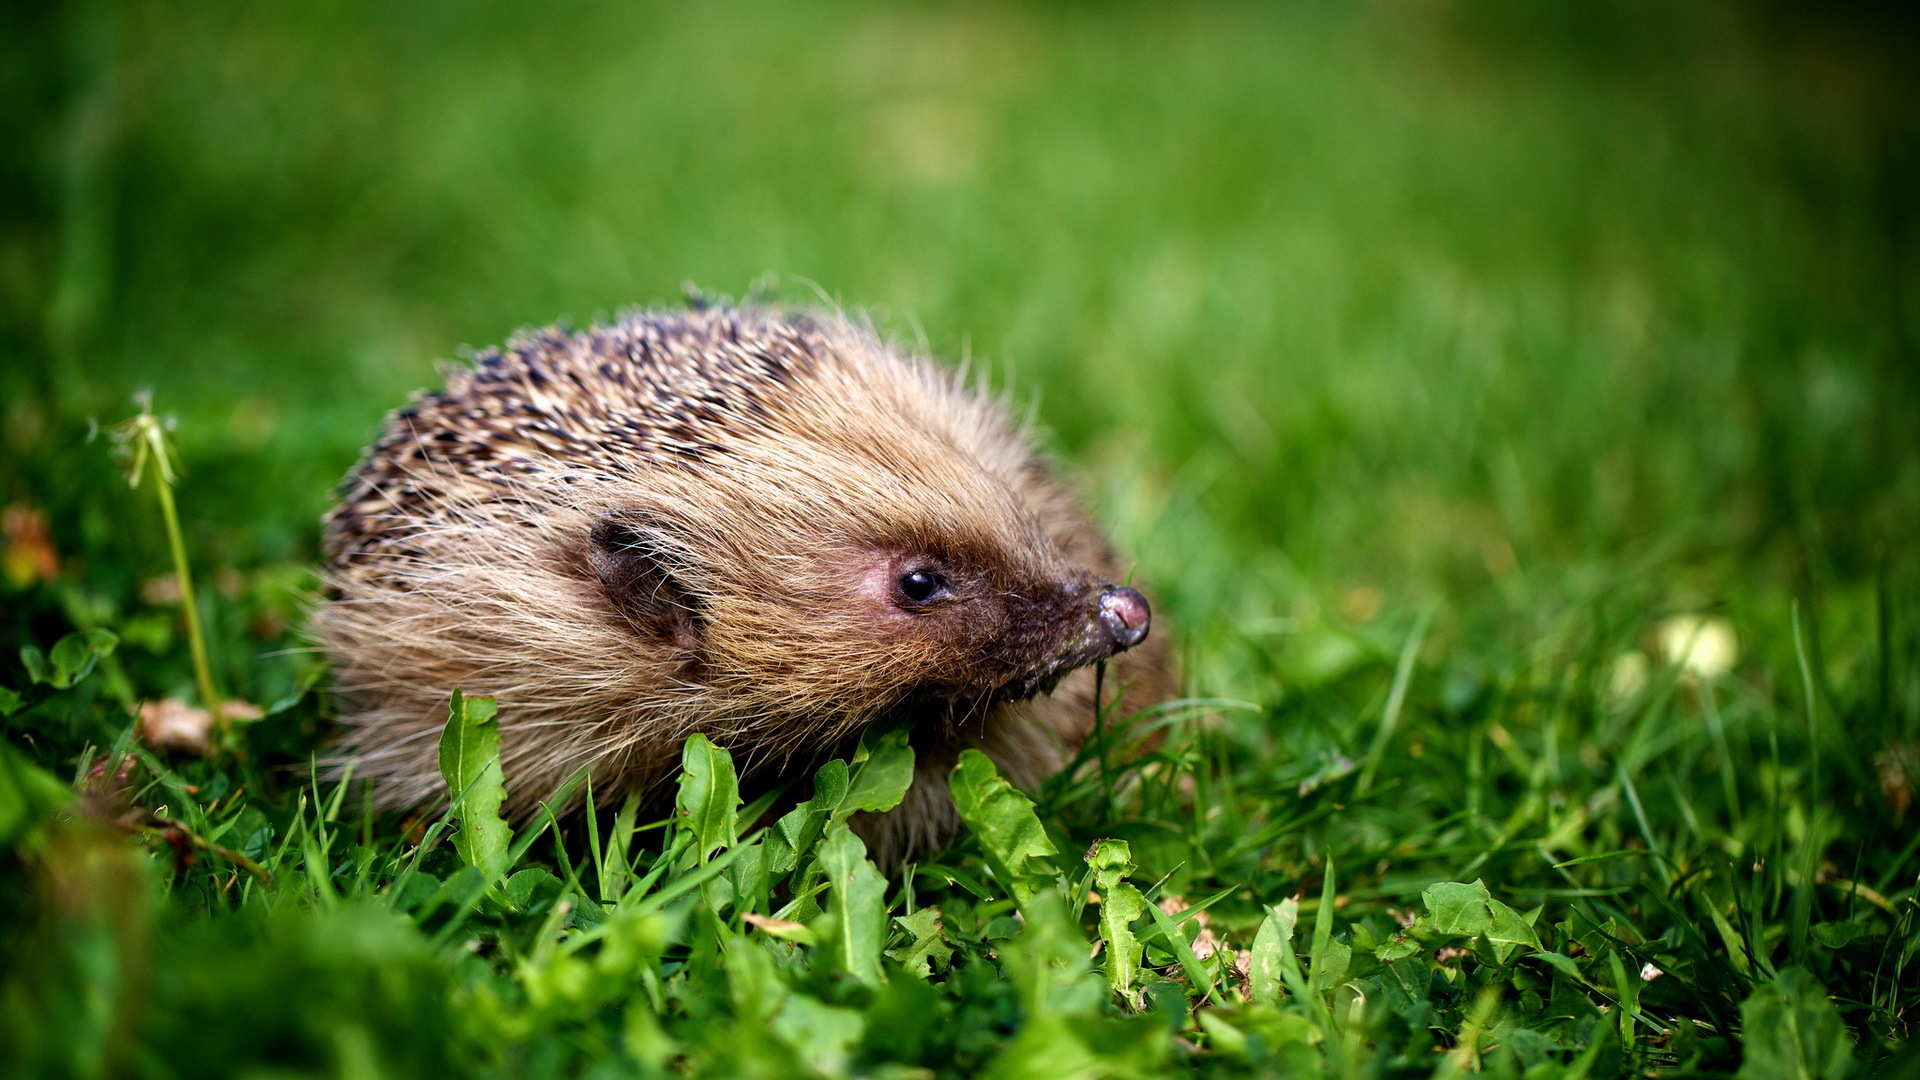  September 23 2015 By Stephen Comments Off on Hedgehog Wallpapers HD